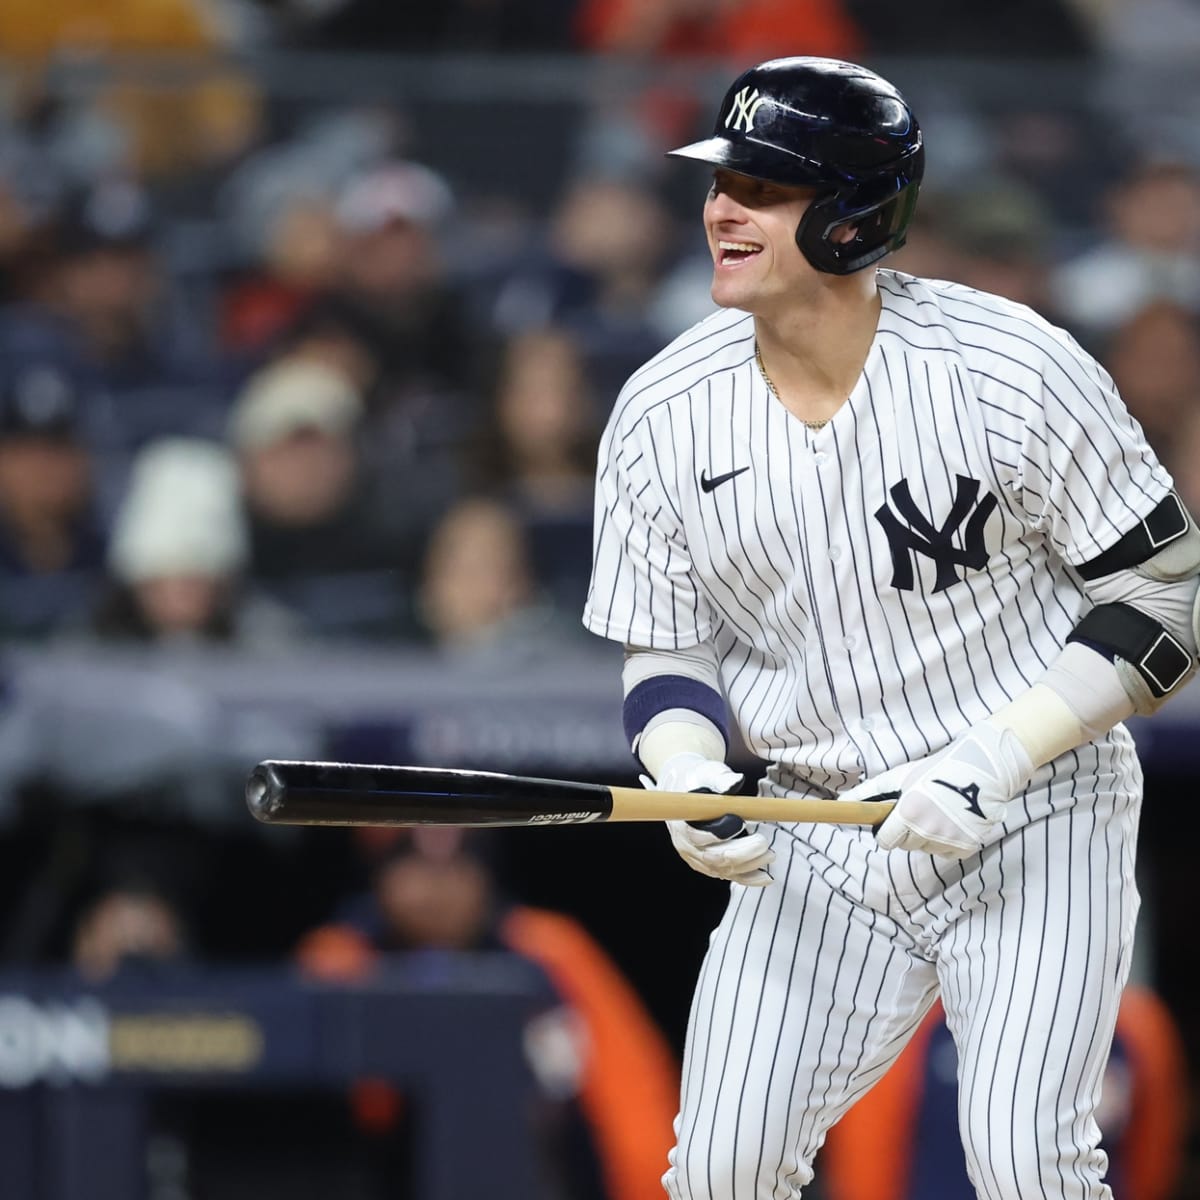 New York Yankees fans annoyed as Josh Donaldson is poised to begin